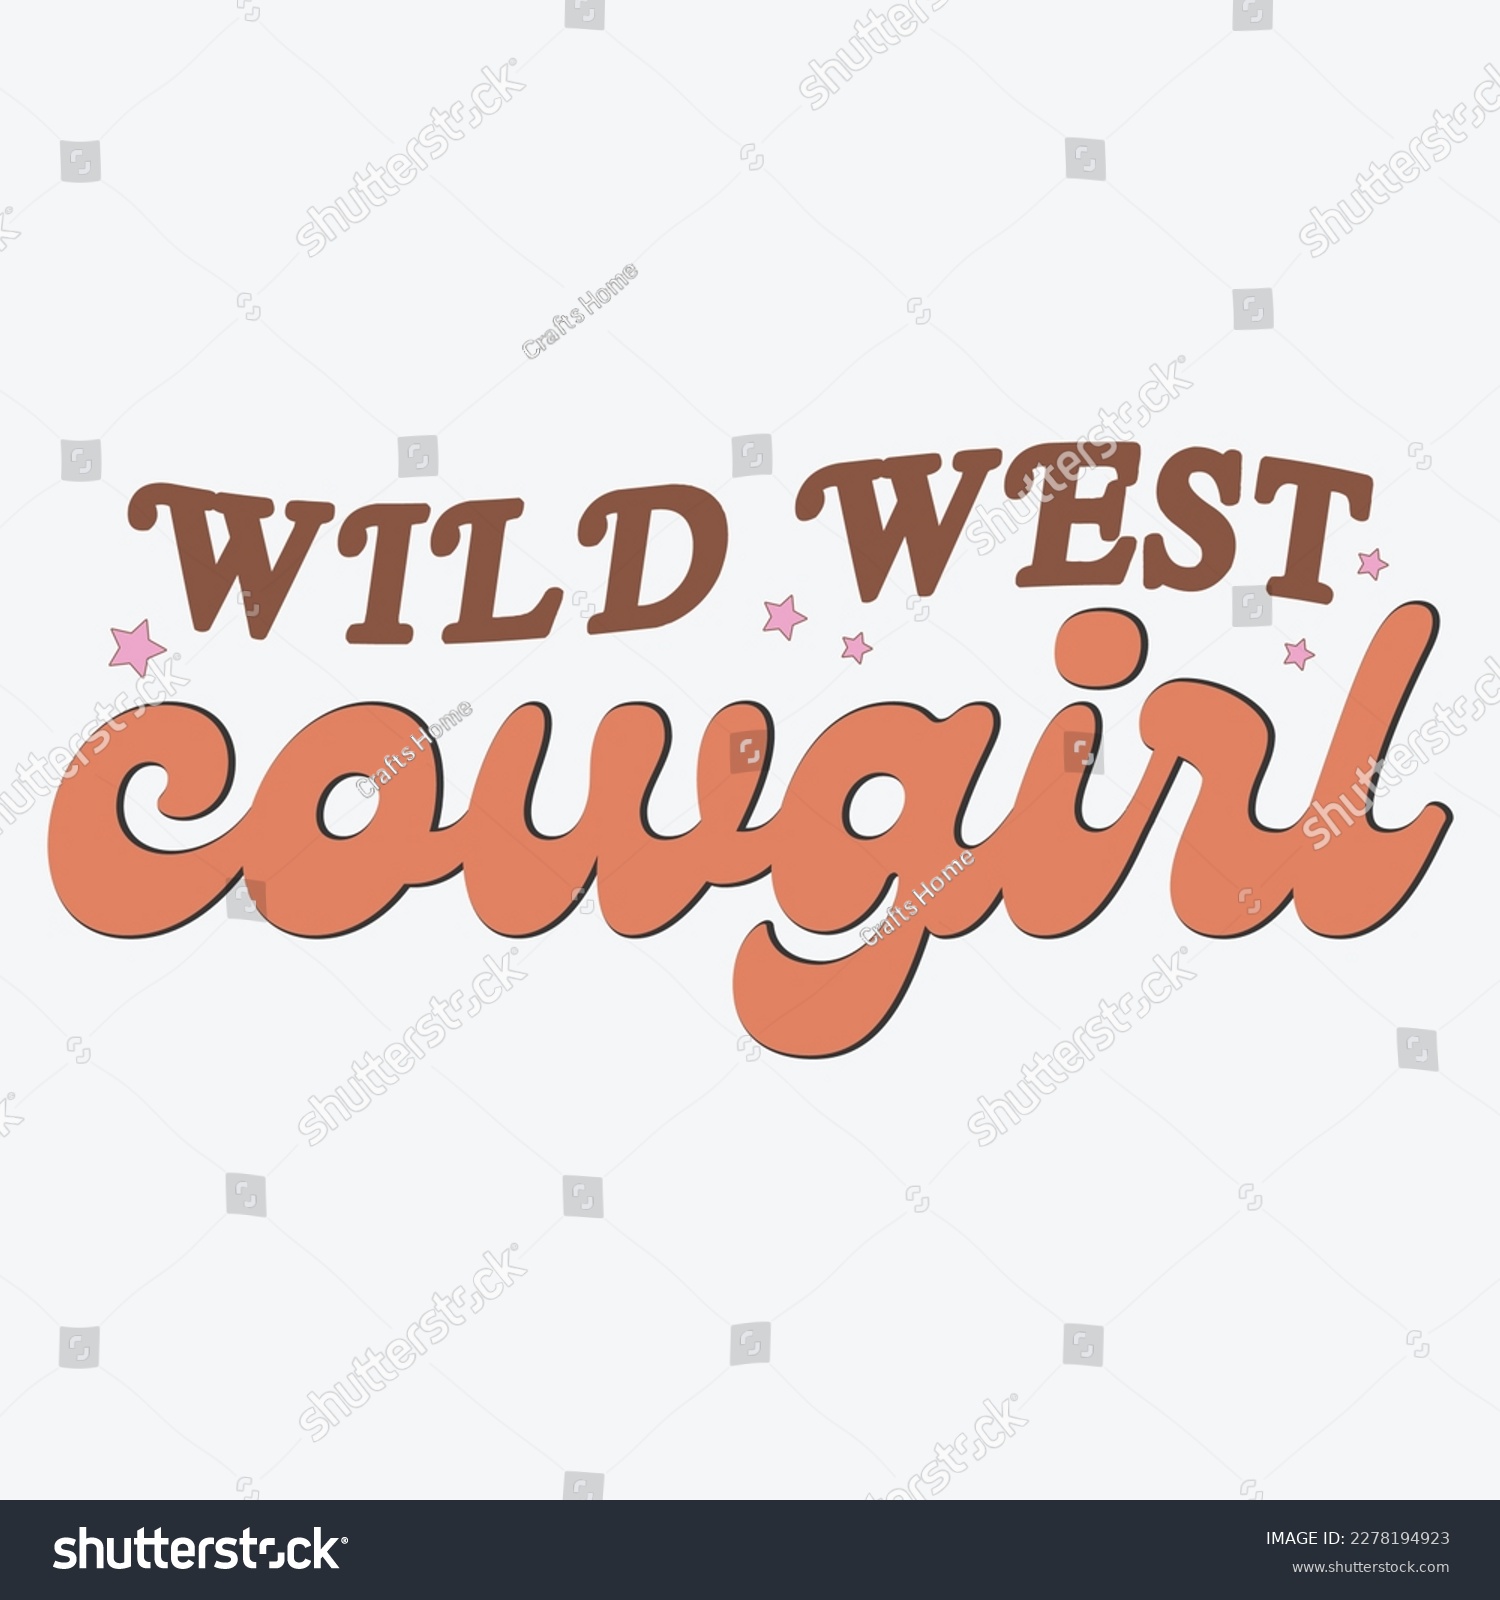 SVG of  Wild West Cowgirl, cowgirl, wild west, cowboy, western, rodeo, horse, country, west, retro, texas, silhouette, vintage, american history, ranch, wyoming, svg